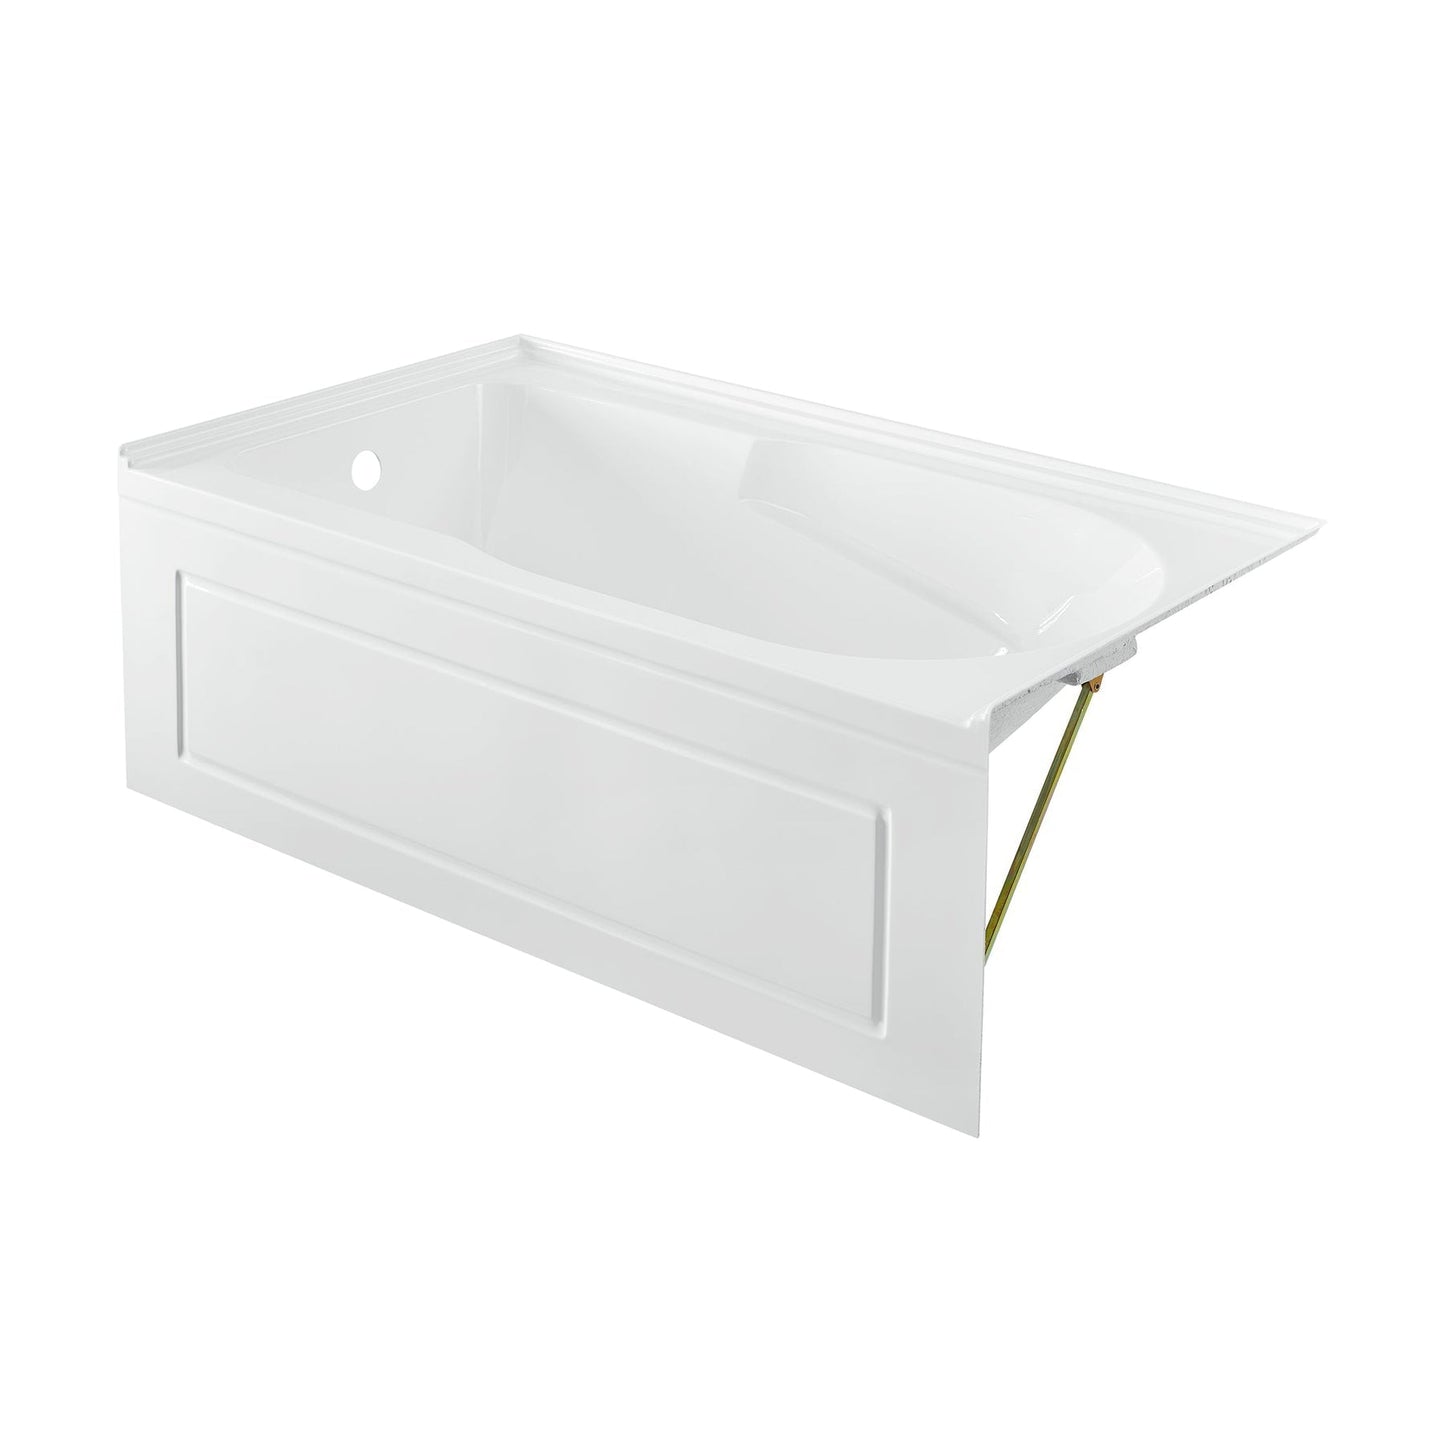 Swiss Madison Concorde 60" x 32" Glossy White Left-Hand Drain Alcove Bathtub With Integrated Armrest and Built-In Flange & Apron Front